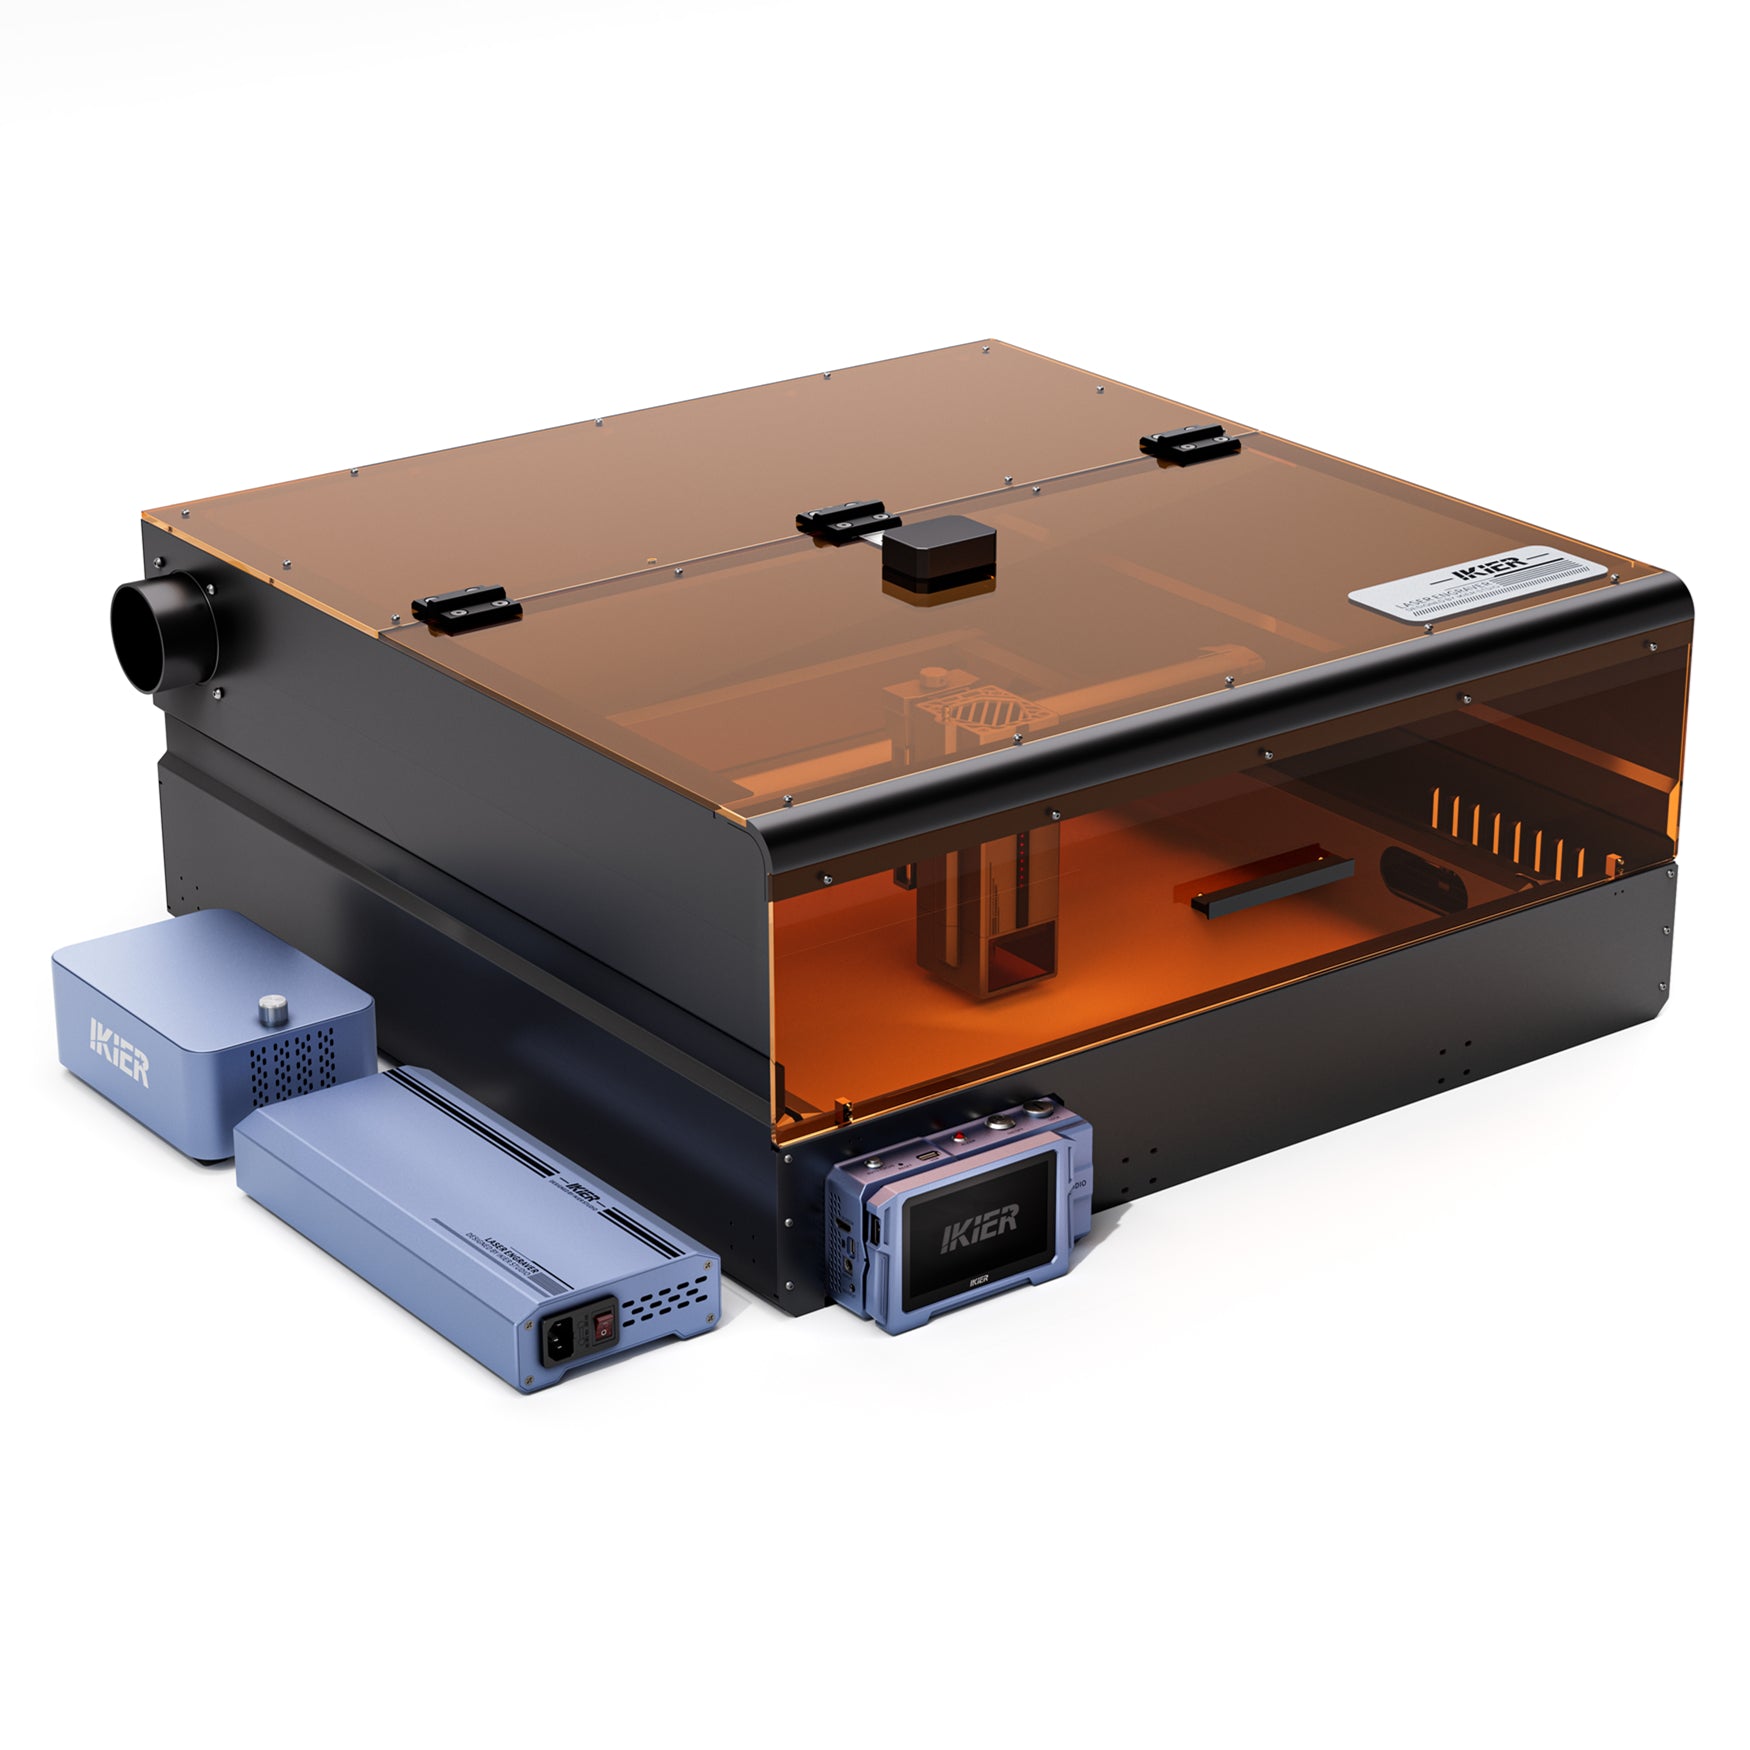 iKier E2 Enclosure with Camera For K1 Series Laser Engraver